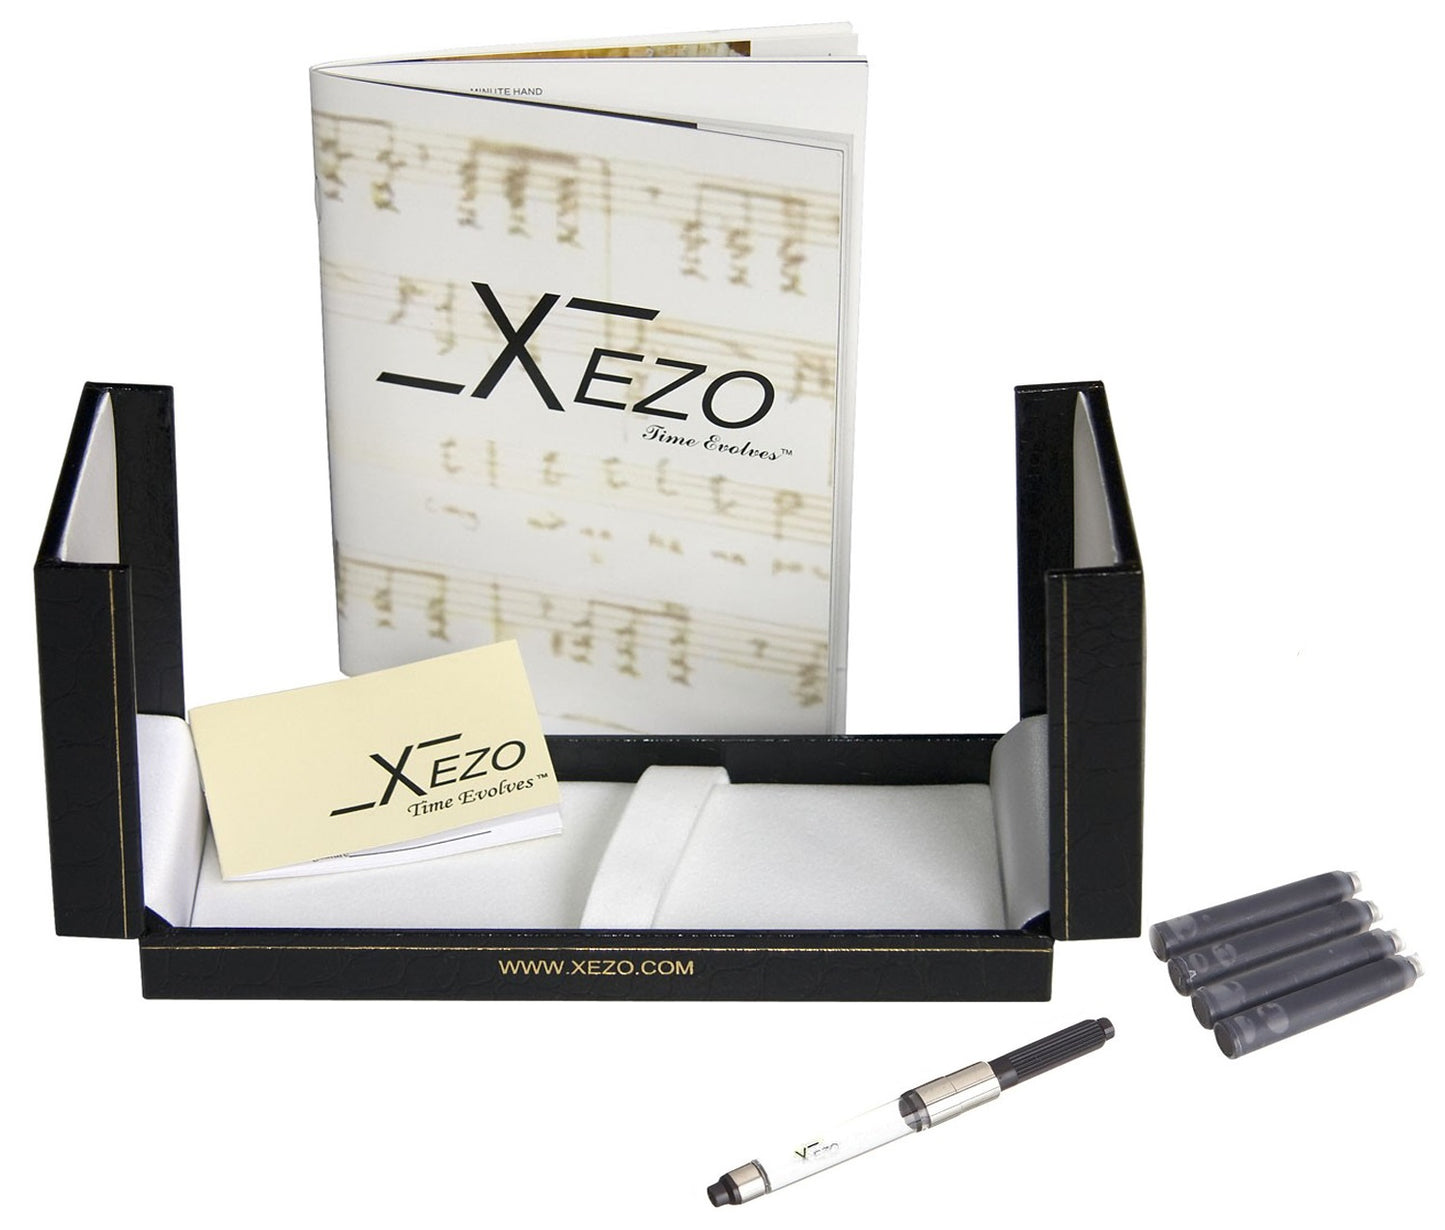 Xezo - Black gift box, certificate, manual, chrome-plated ink converter, and four ink cartridges of the Maestro Black Mother of Pearl FBP-M fountain pen